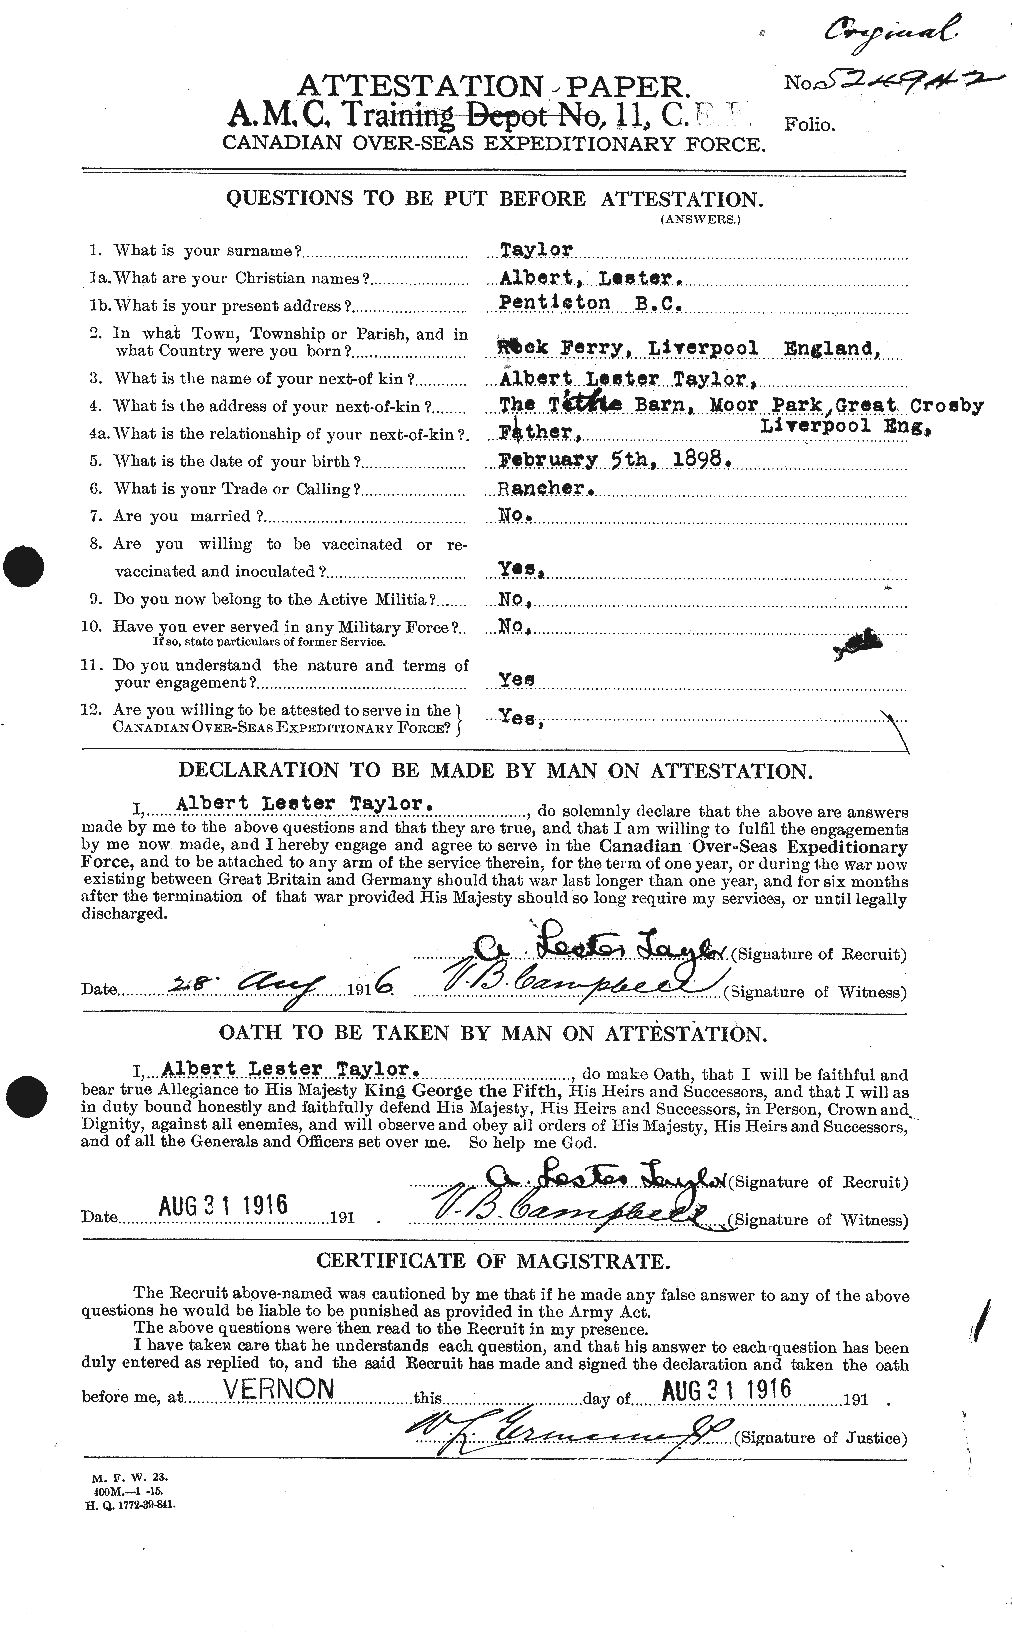 Personnel Records of the First World War - CEF 626122a